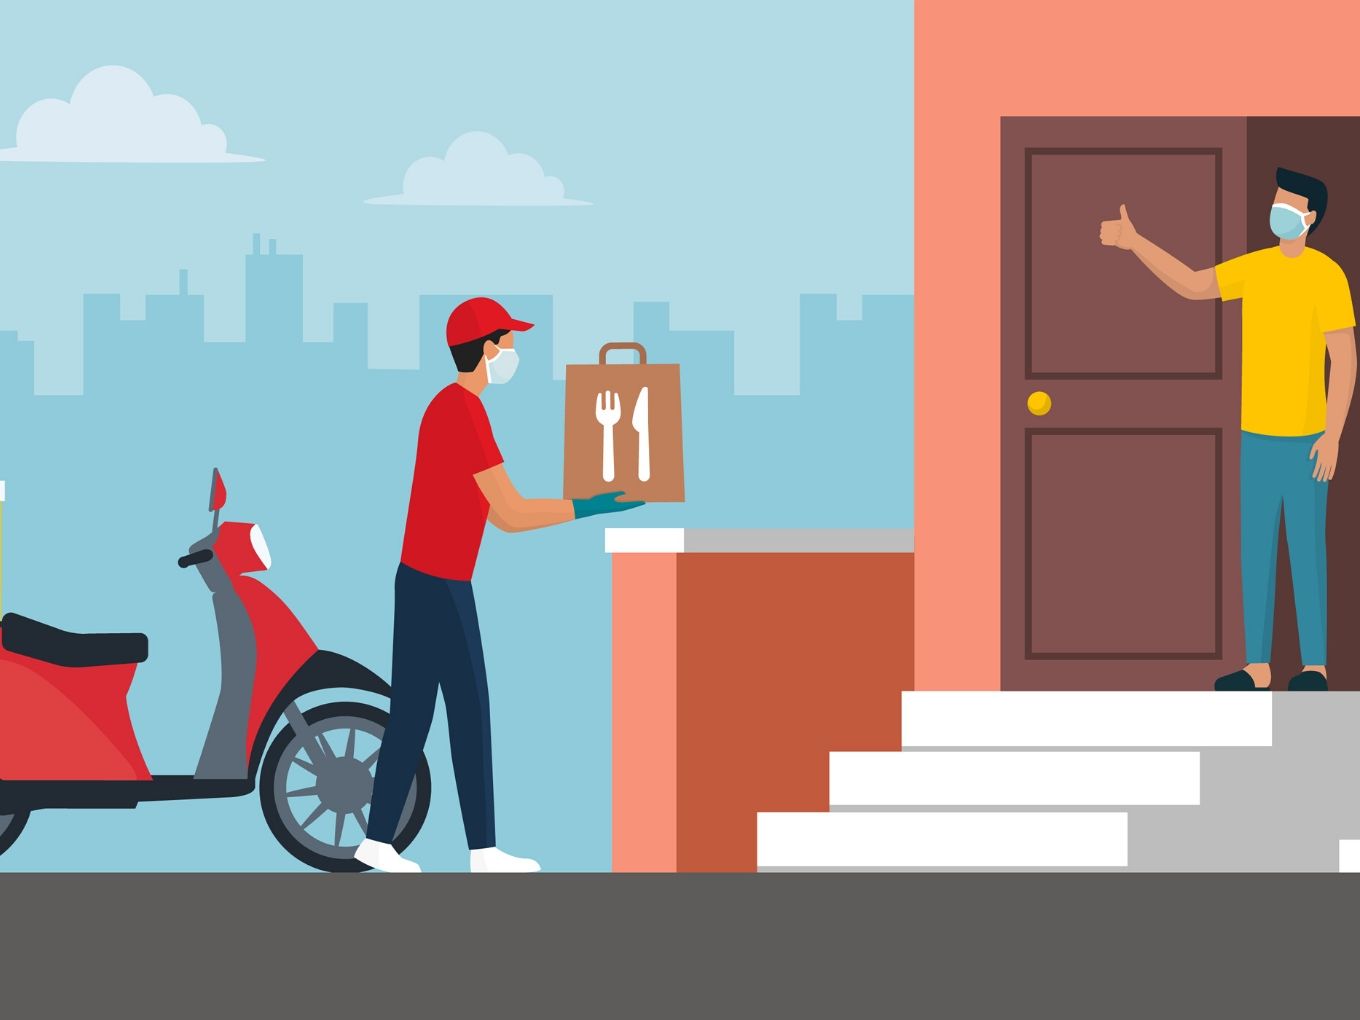 #StartupsVsCovid19: Zomato Now Wants To Deliver Liquor To Home On Lockdown Day 45